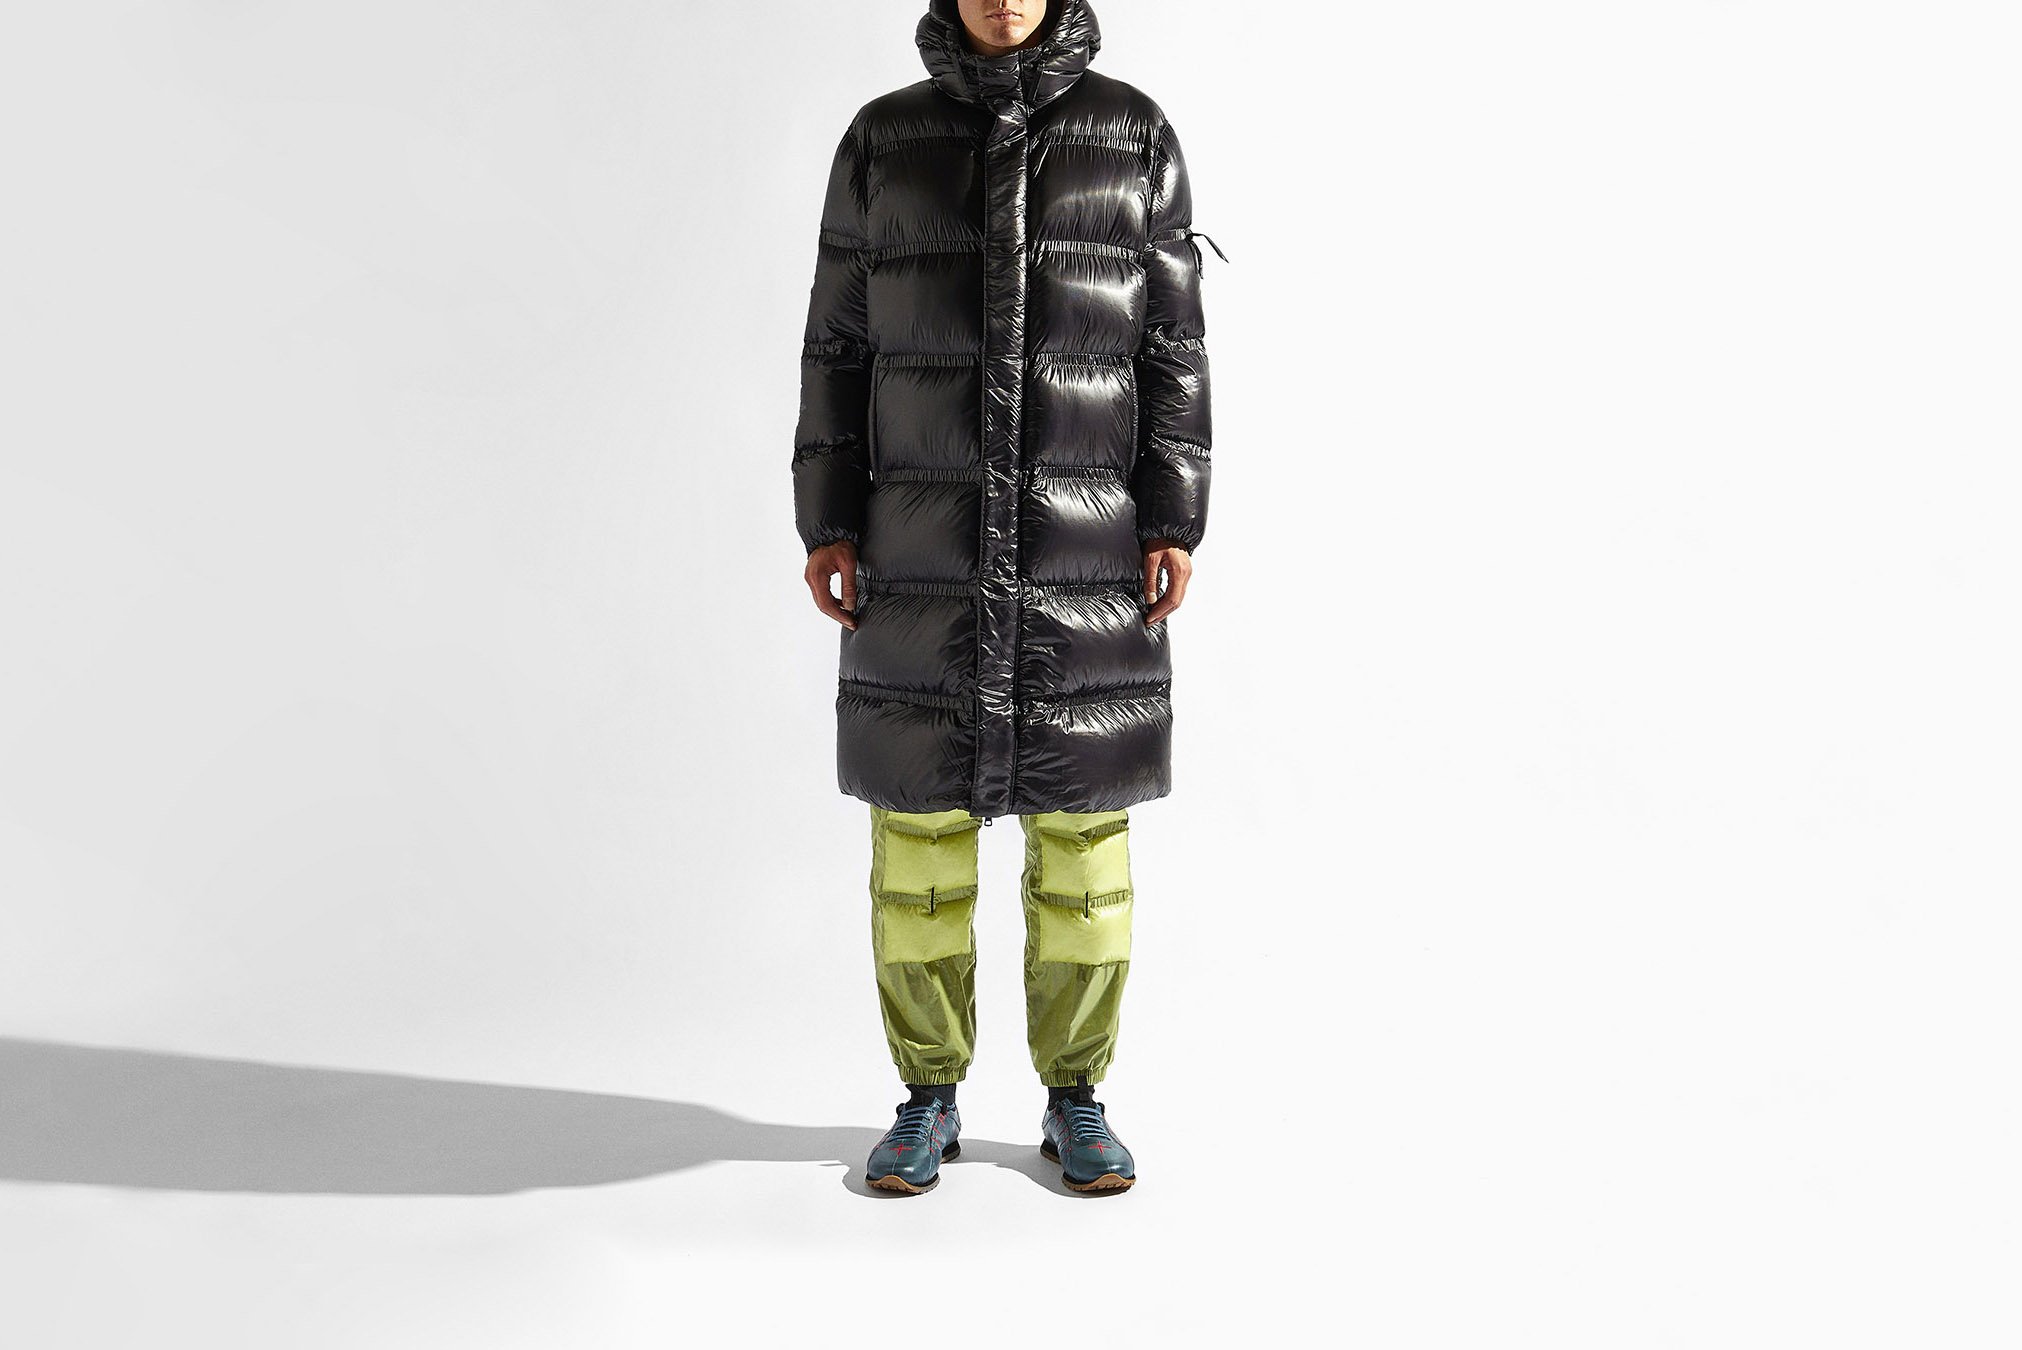 Moncler Genius - 5 Craig Green - Register Now on END. Launches